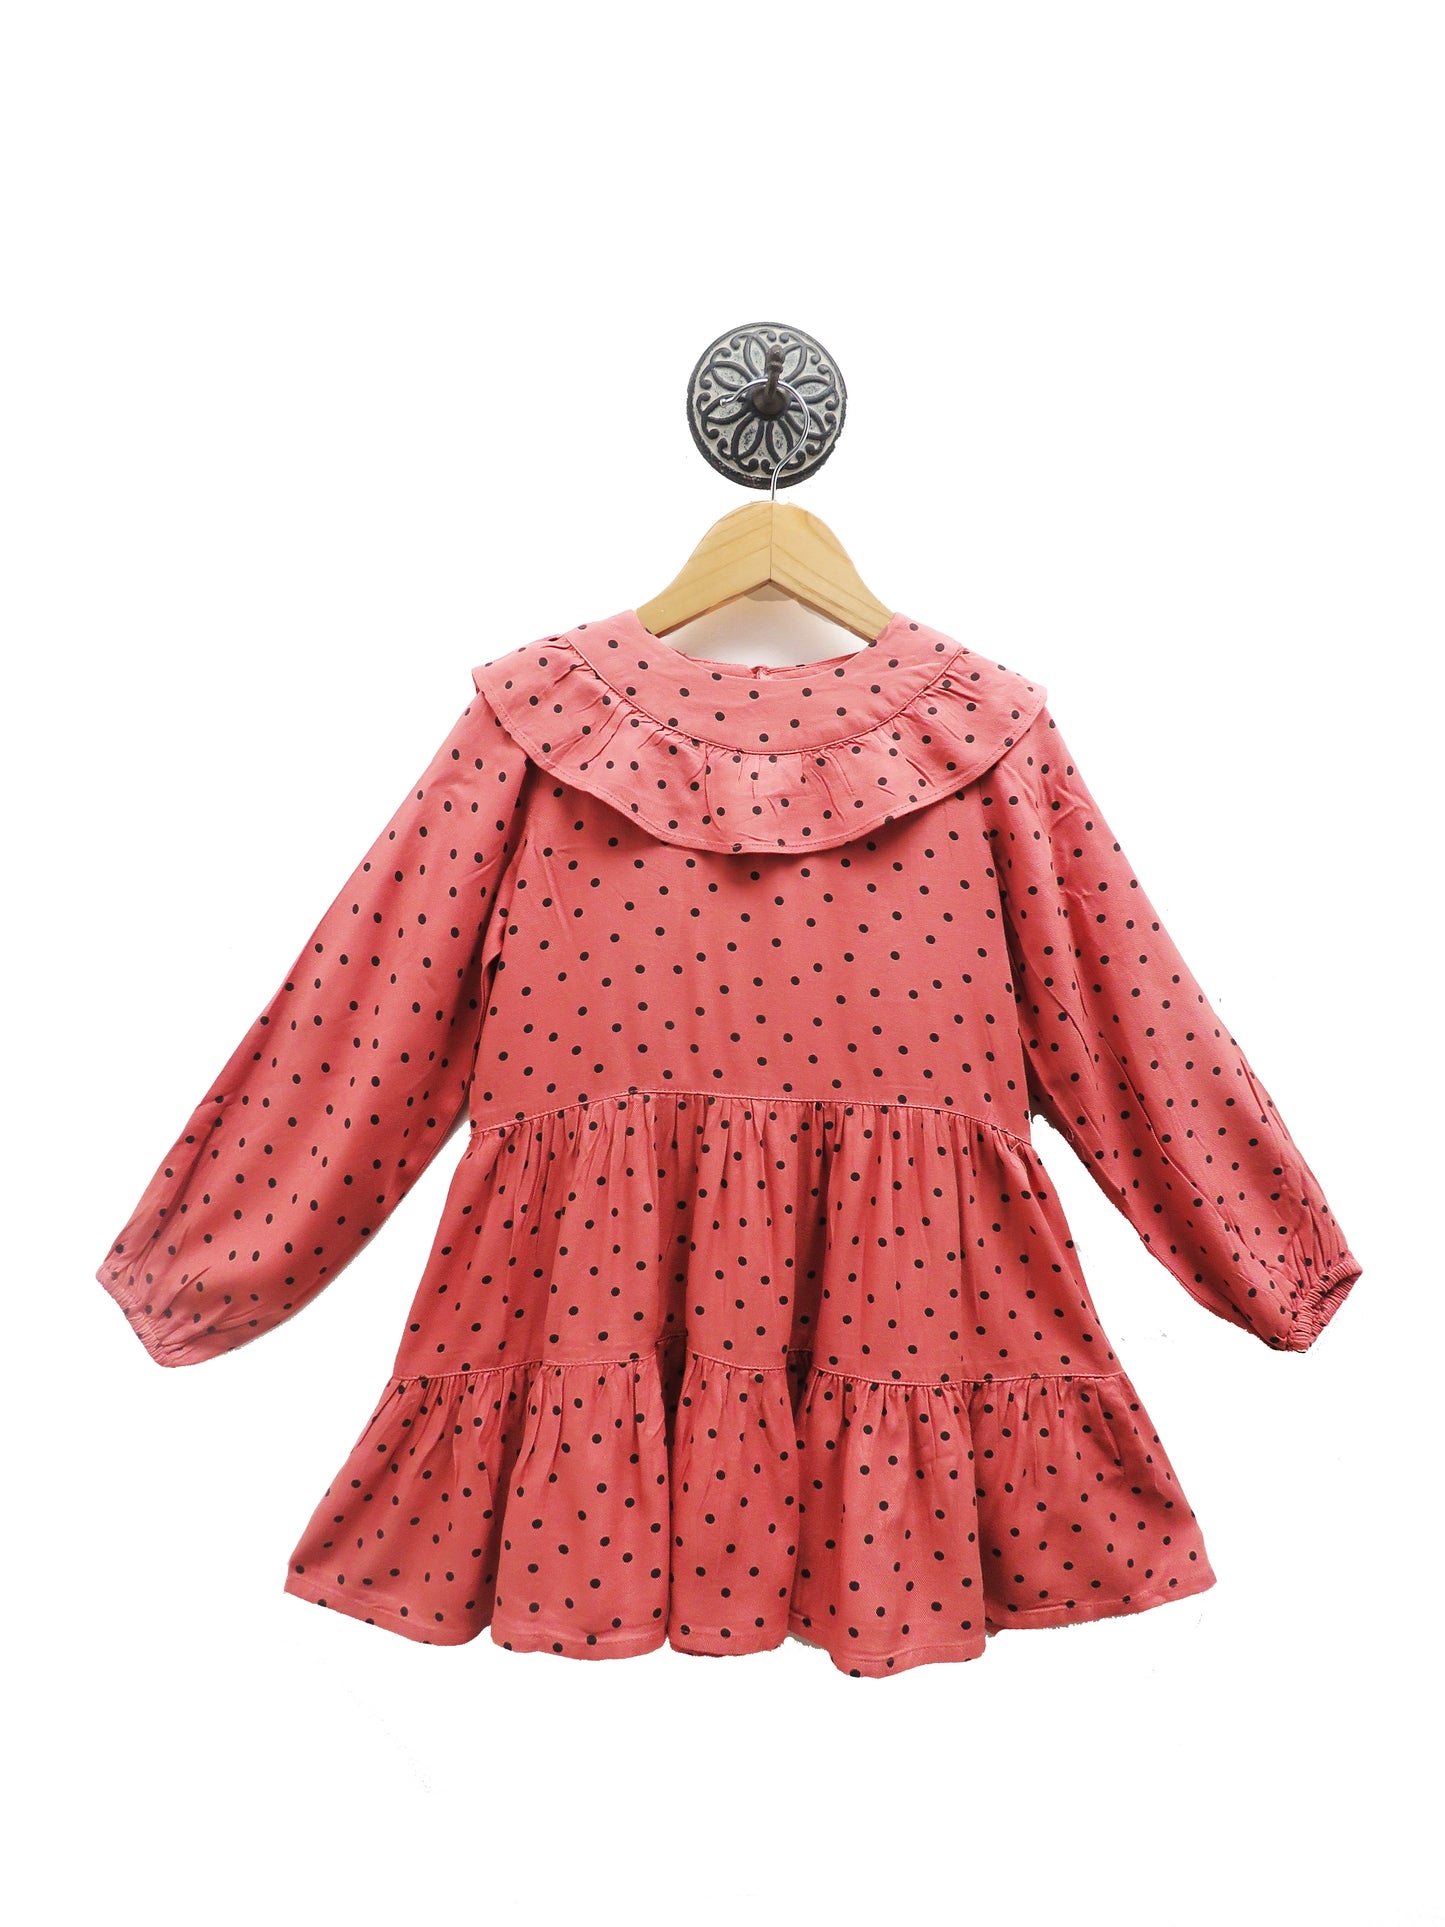 Elegant Coral Polka Dotted Dress With Frills On The Yoke